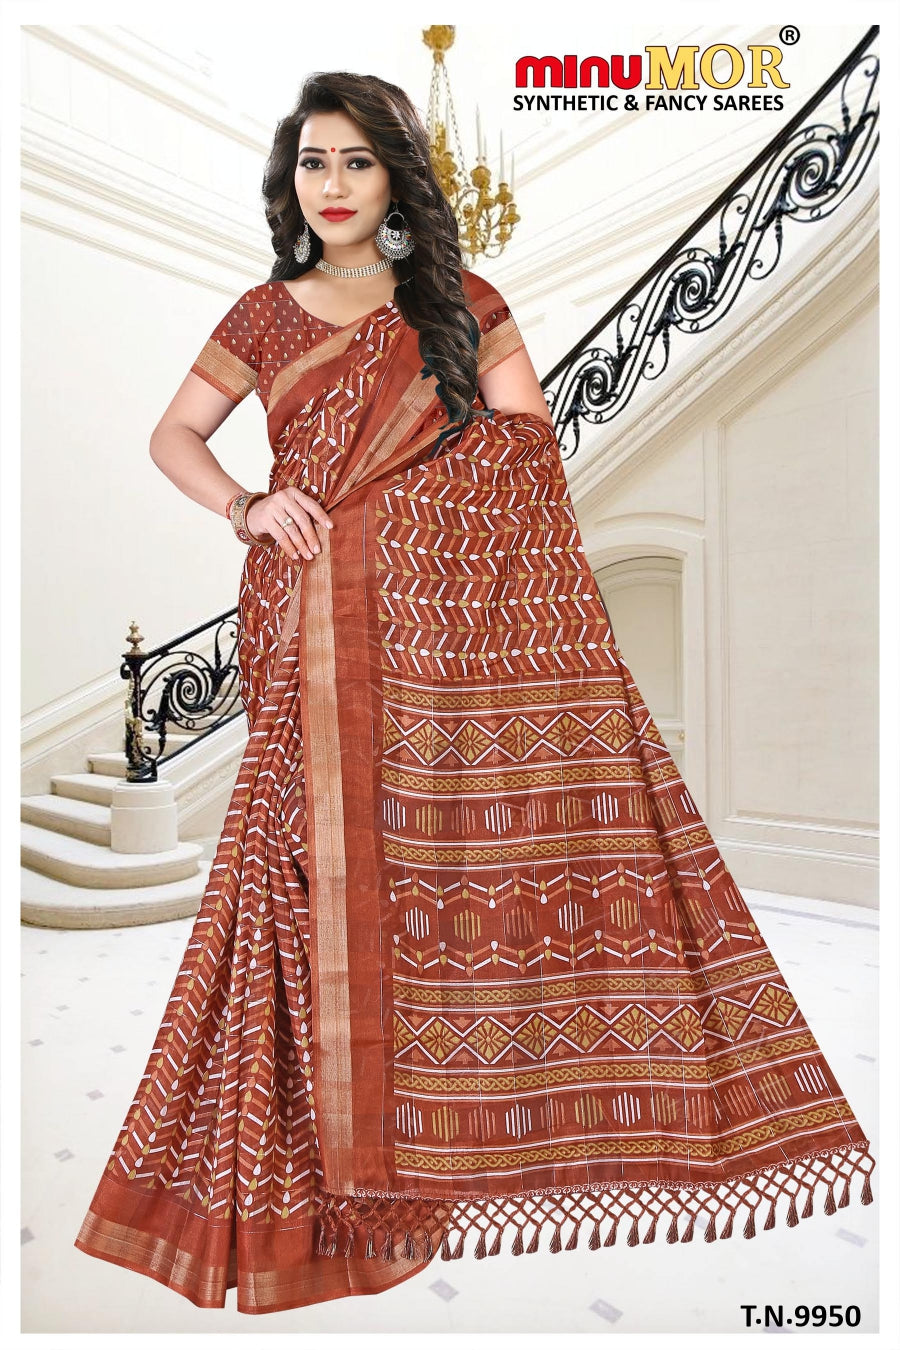 handloom saree wholesale for Diwali at low prices 